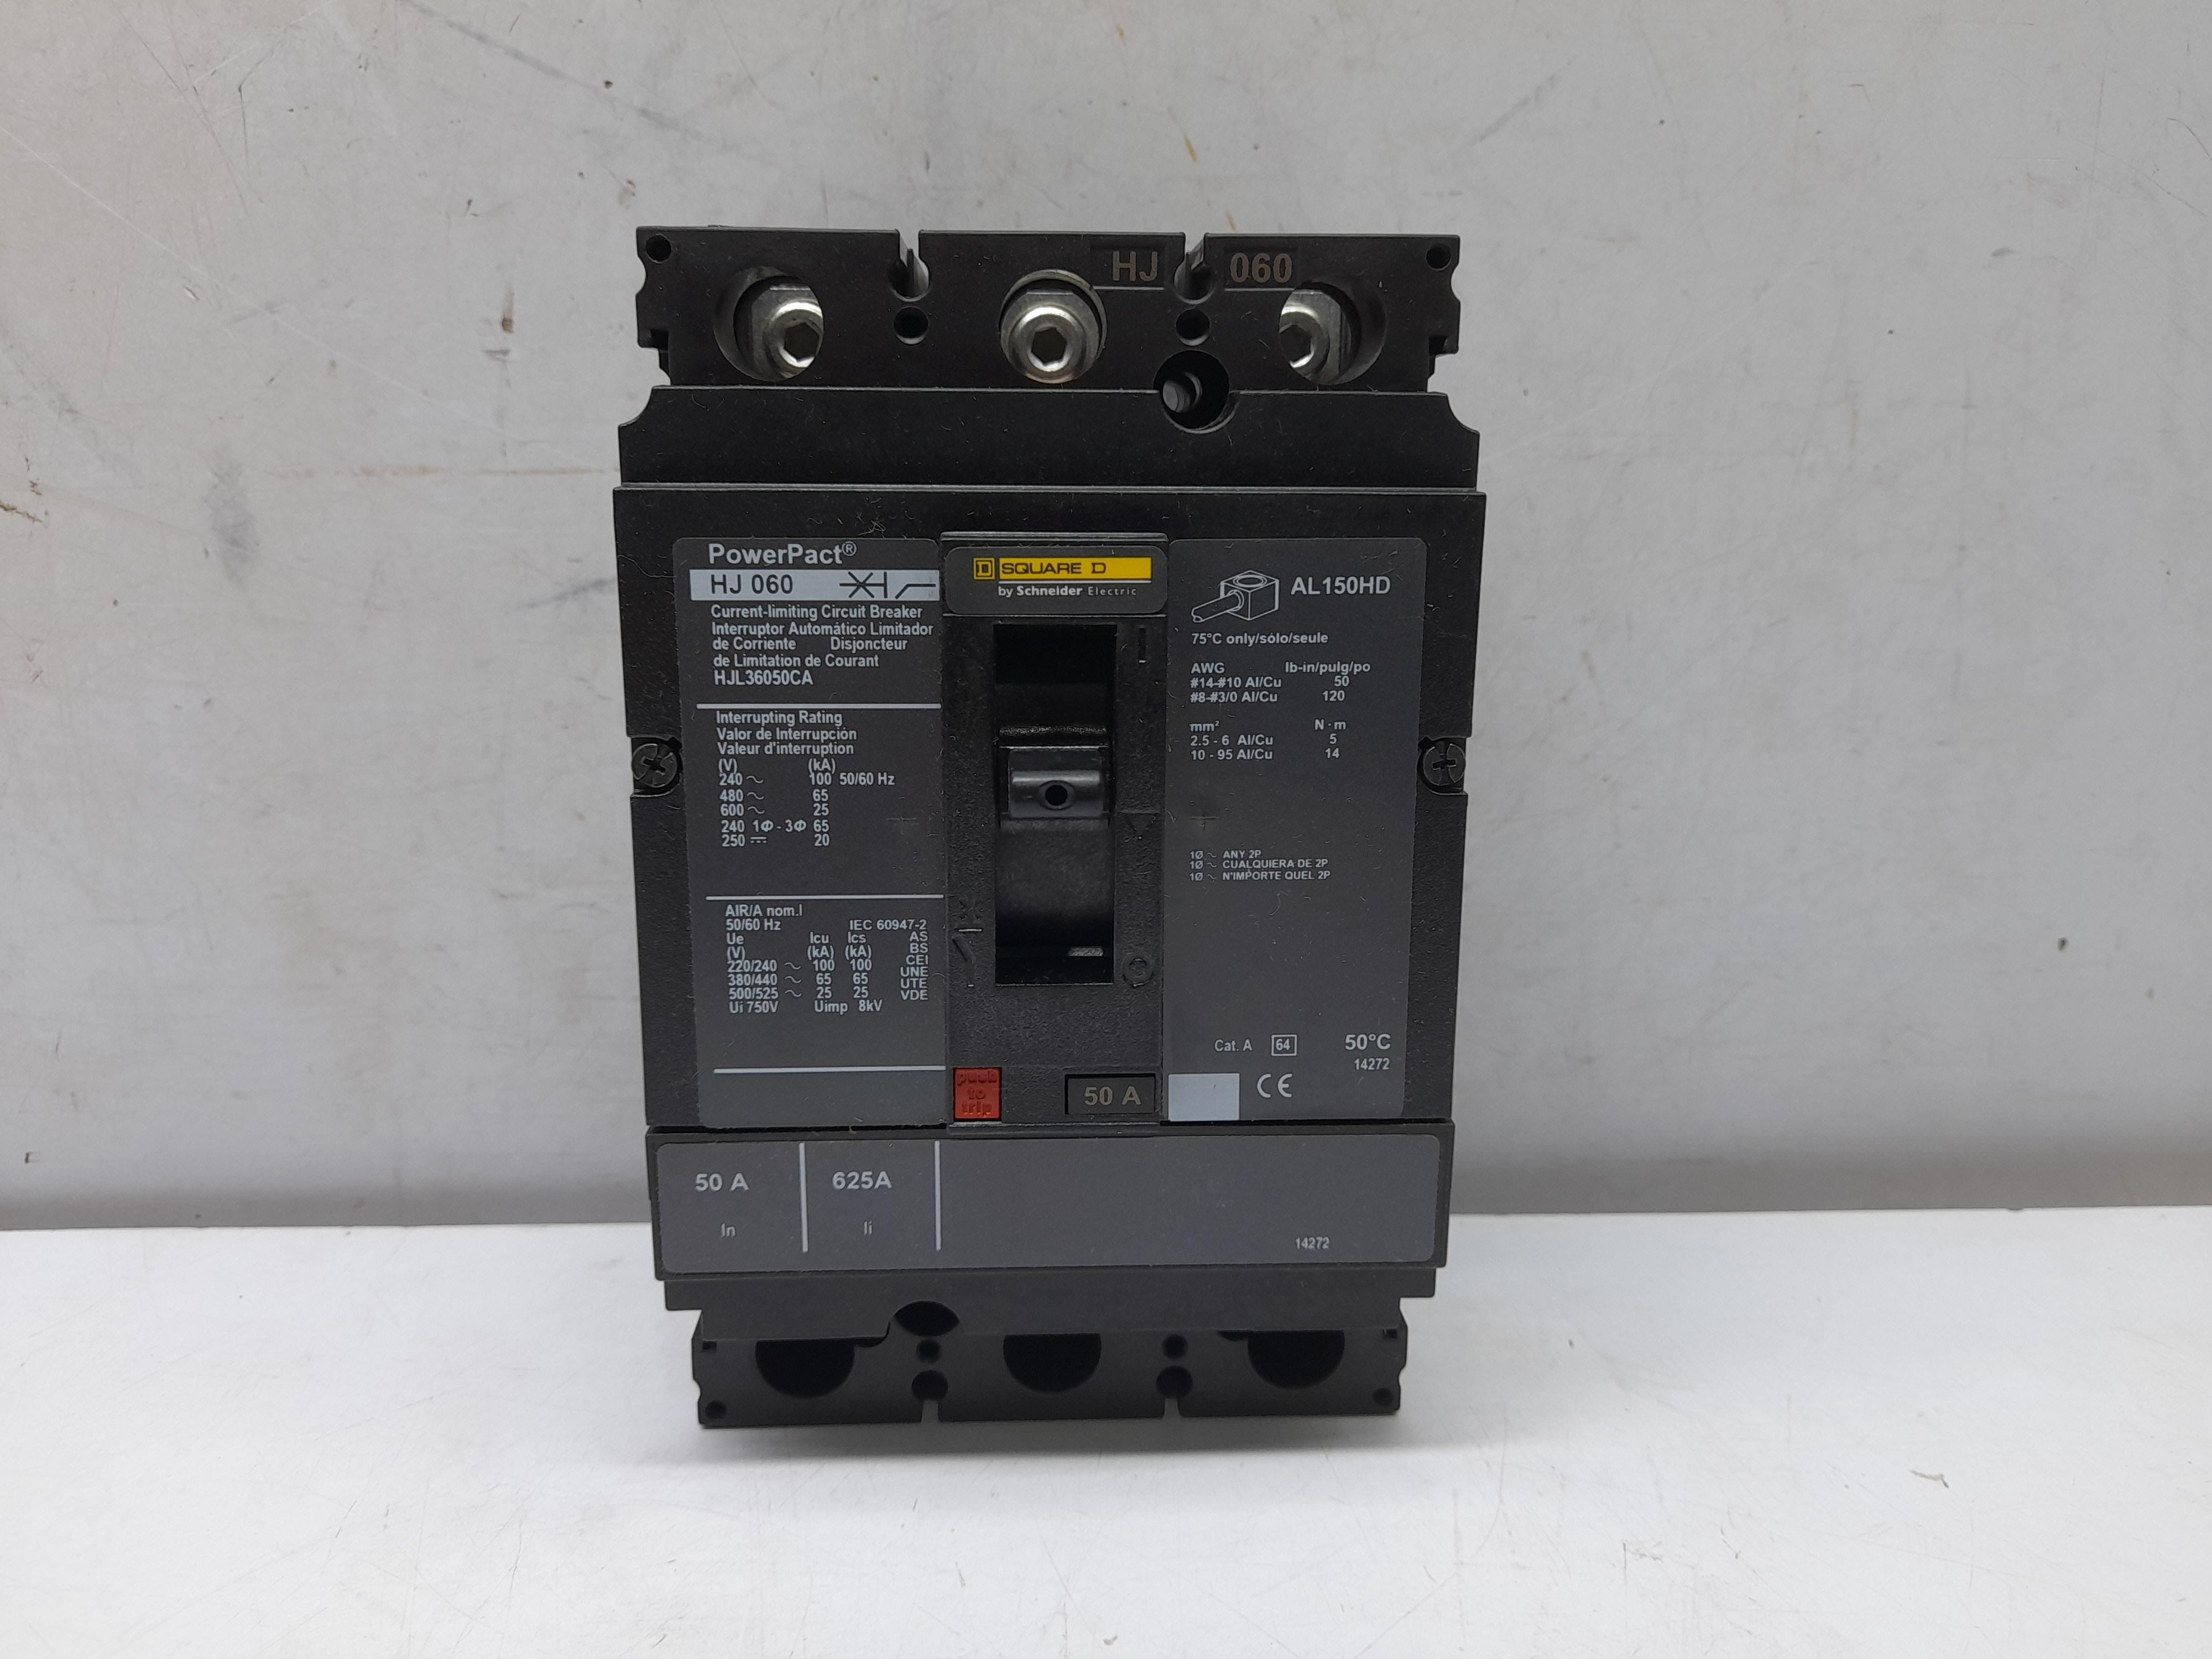 Square D HJL36050CA PowerPact Current Limiting Circuit Breaker